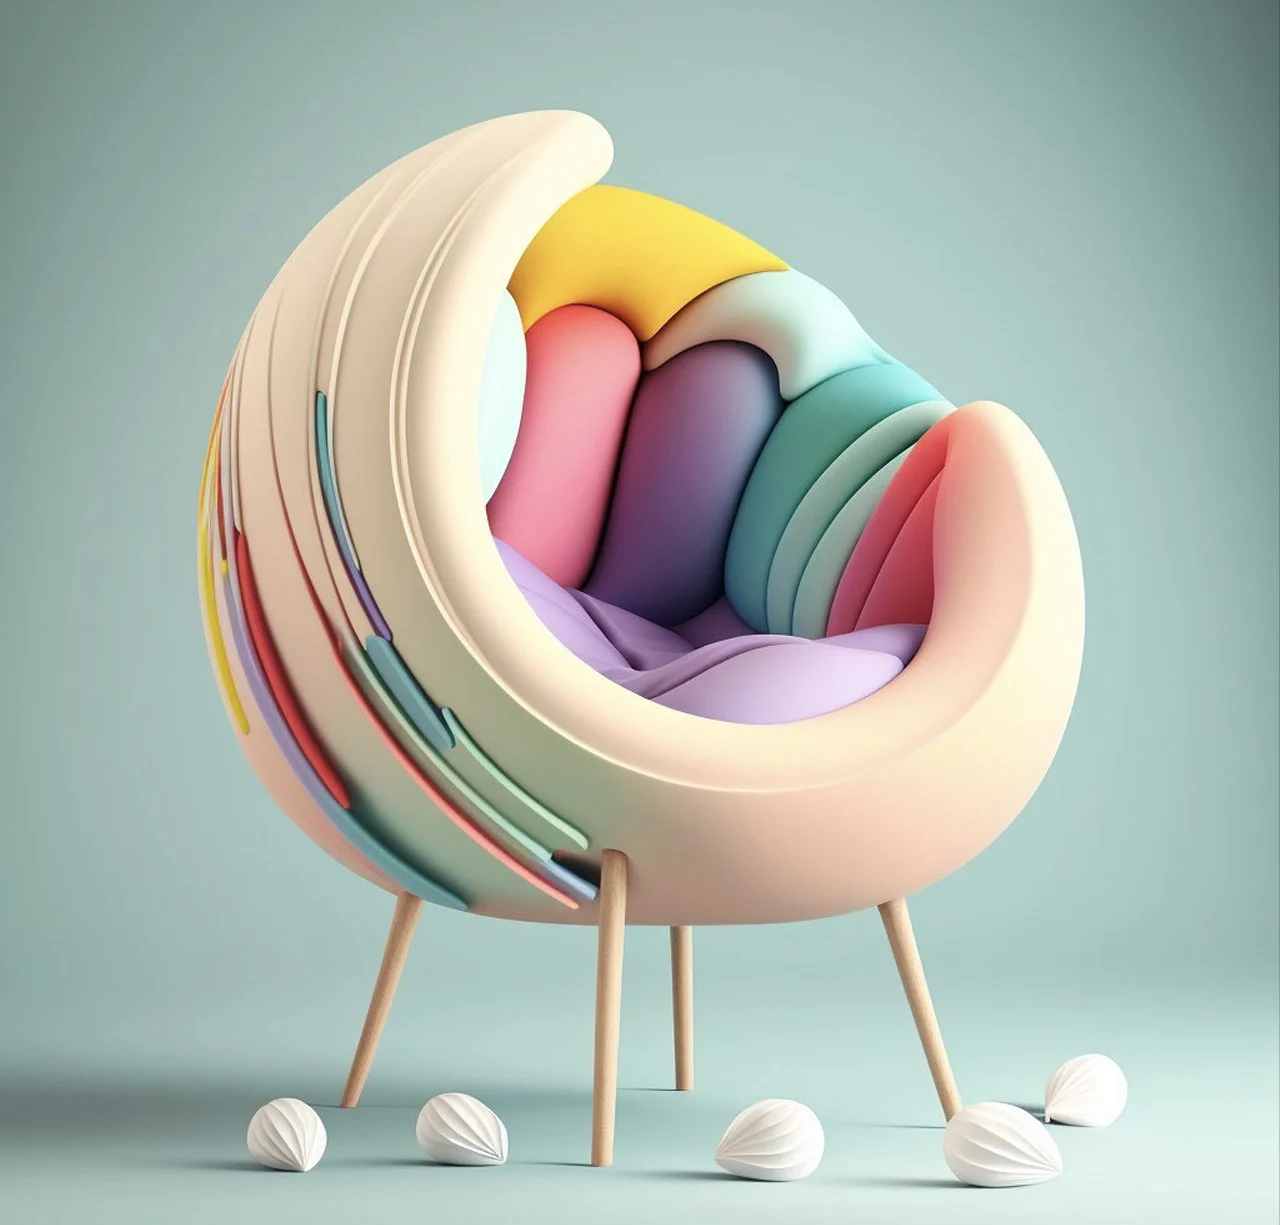 The funky furniture designs, looks
  marvelous